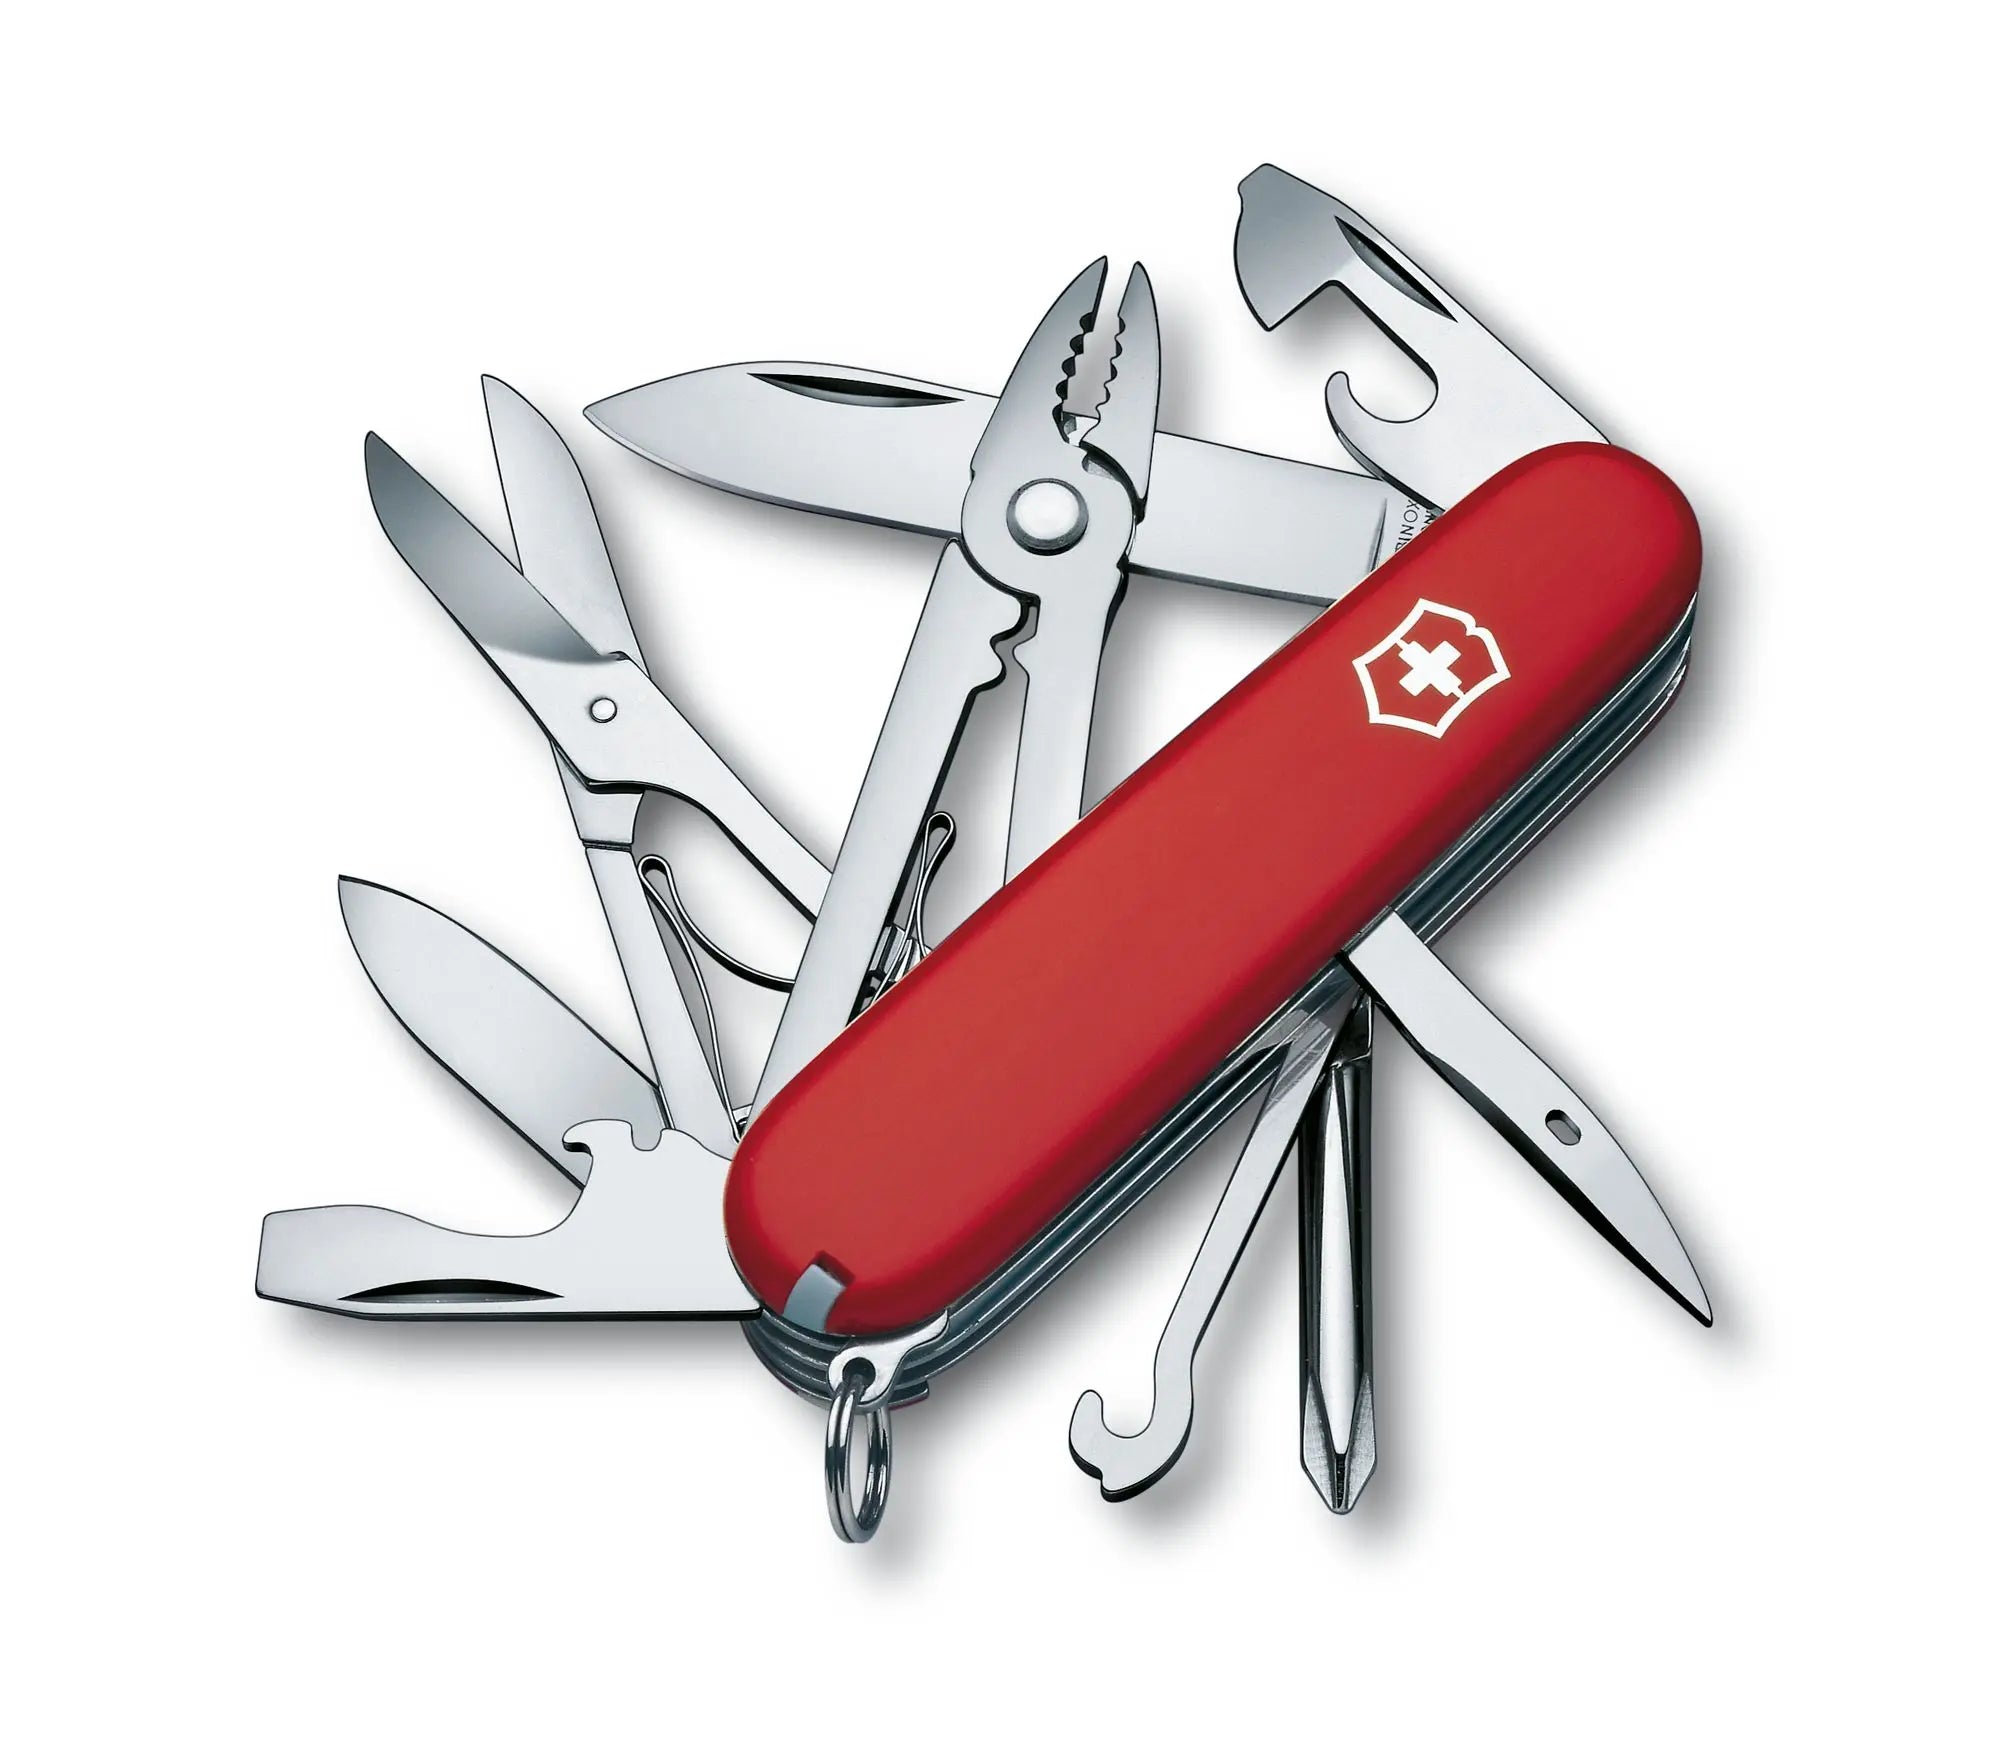 Deluxe Tinker Swiss Army Knife